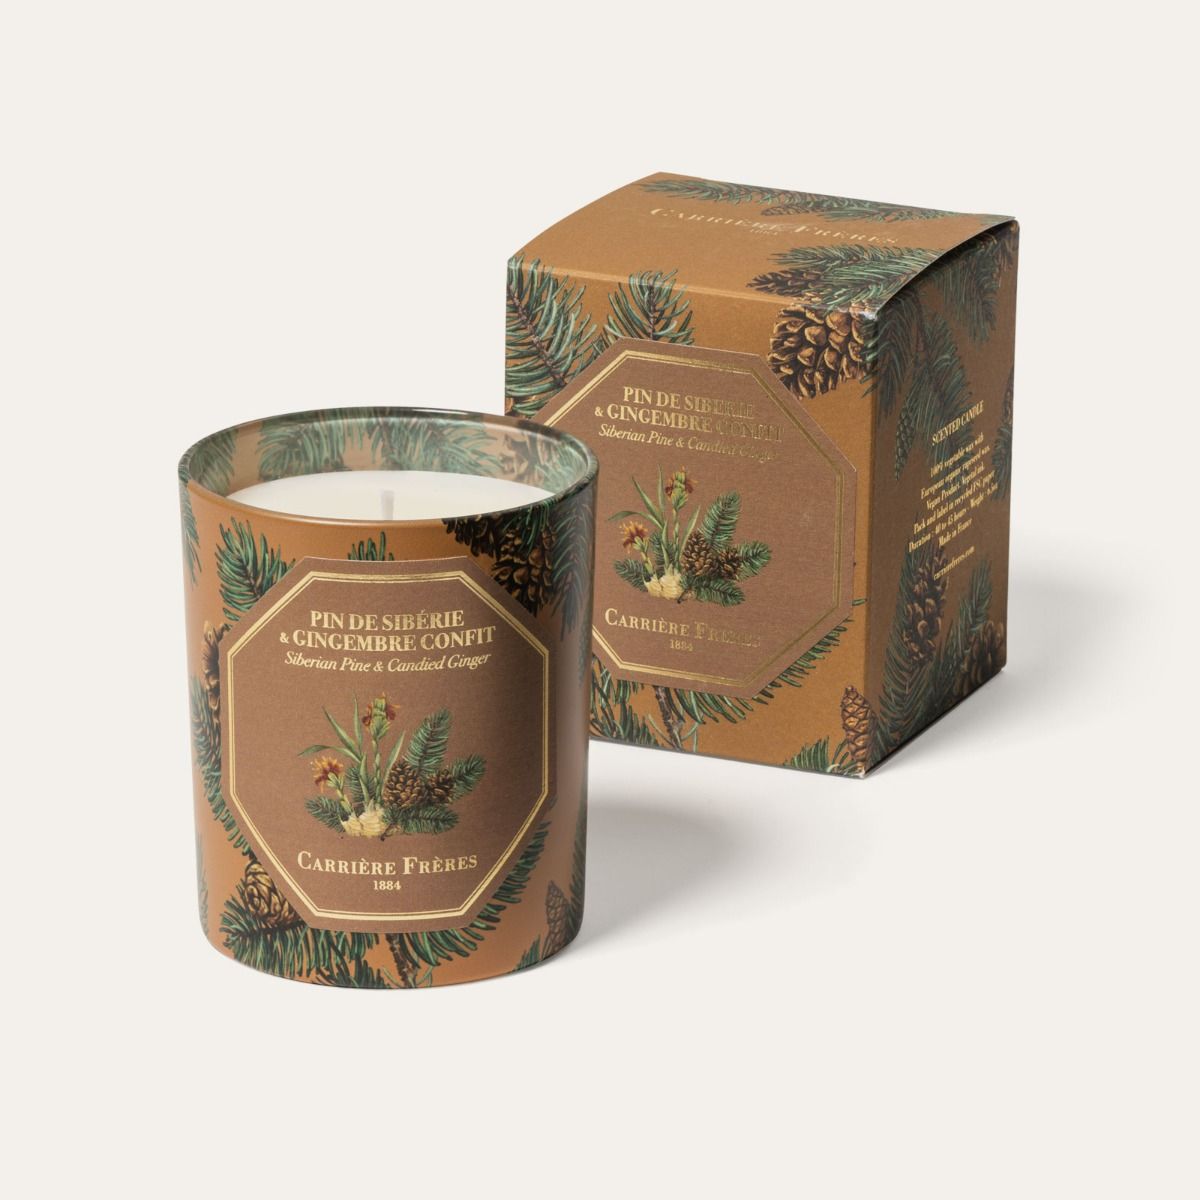 Siberian Pine & Candied Ginger Candle